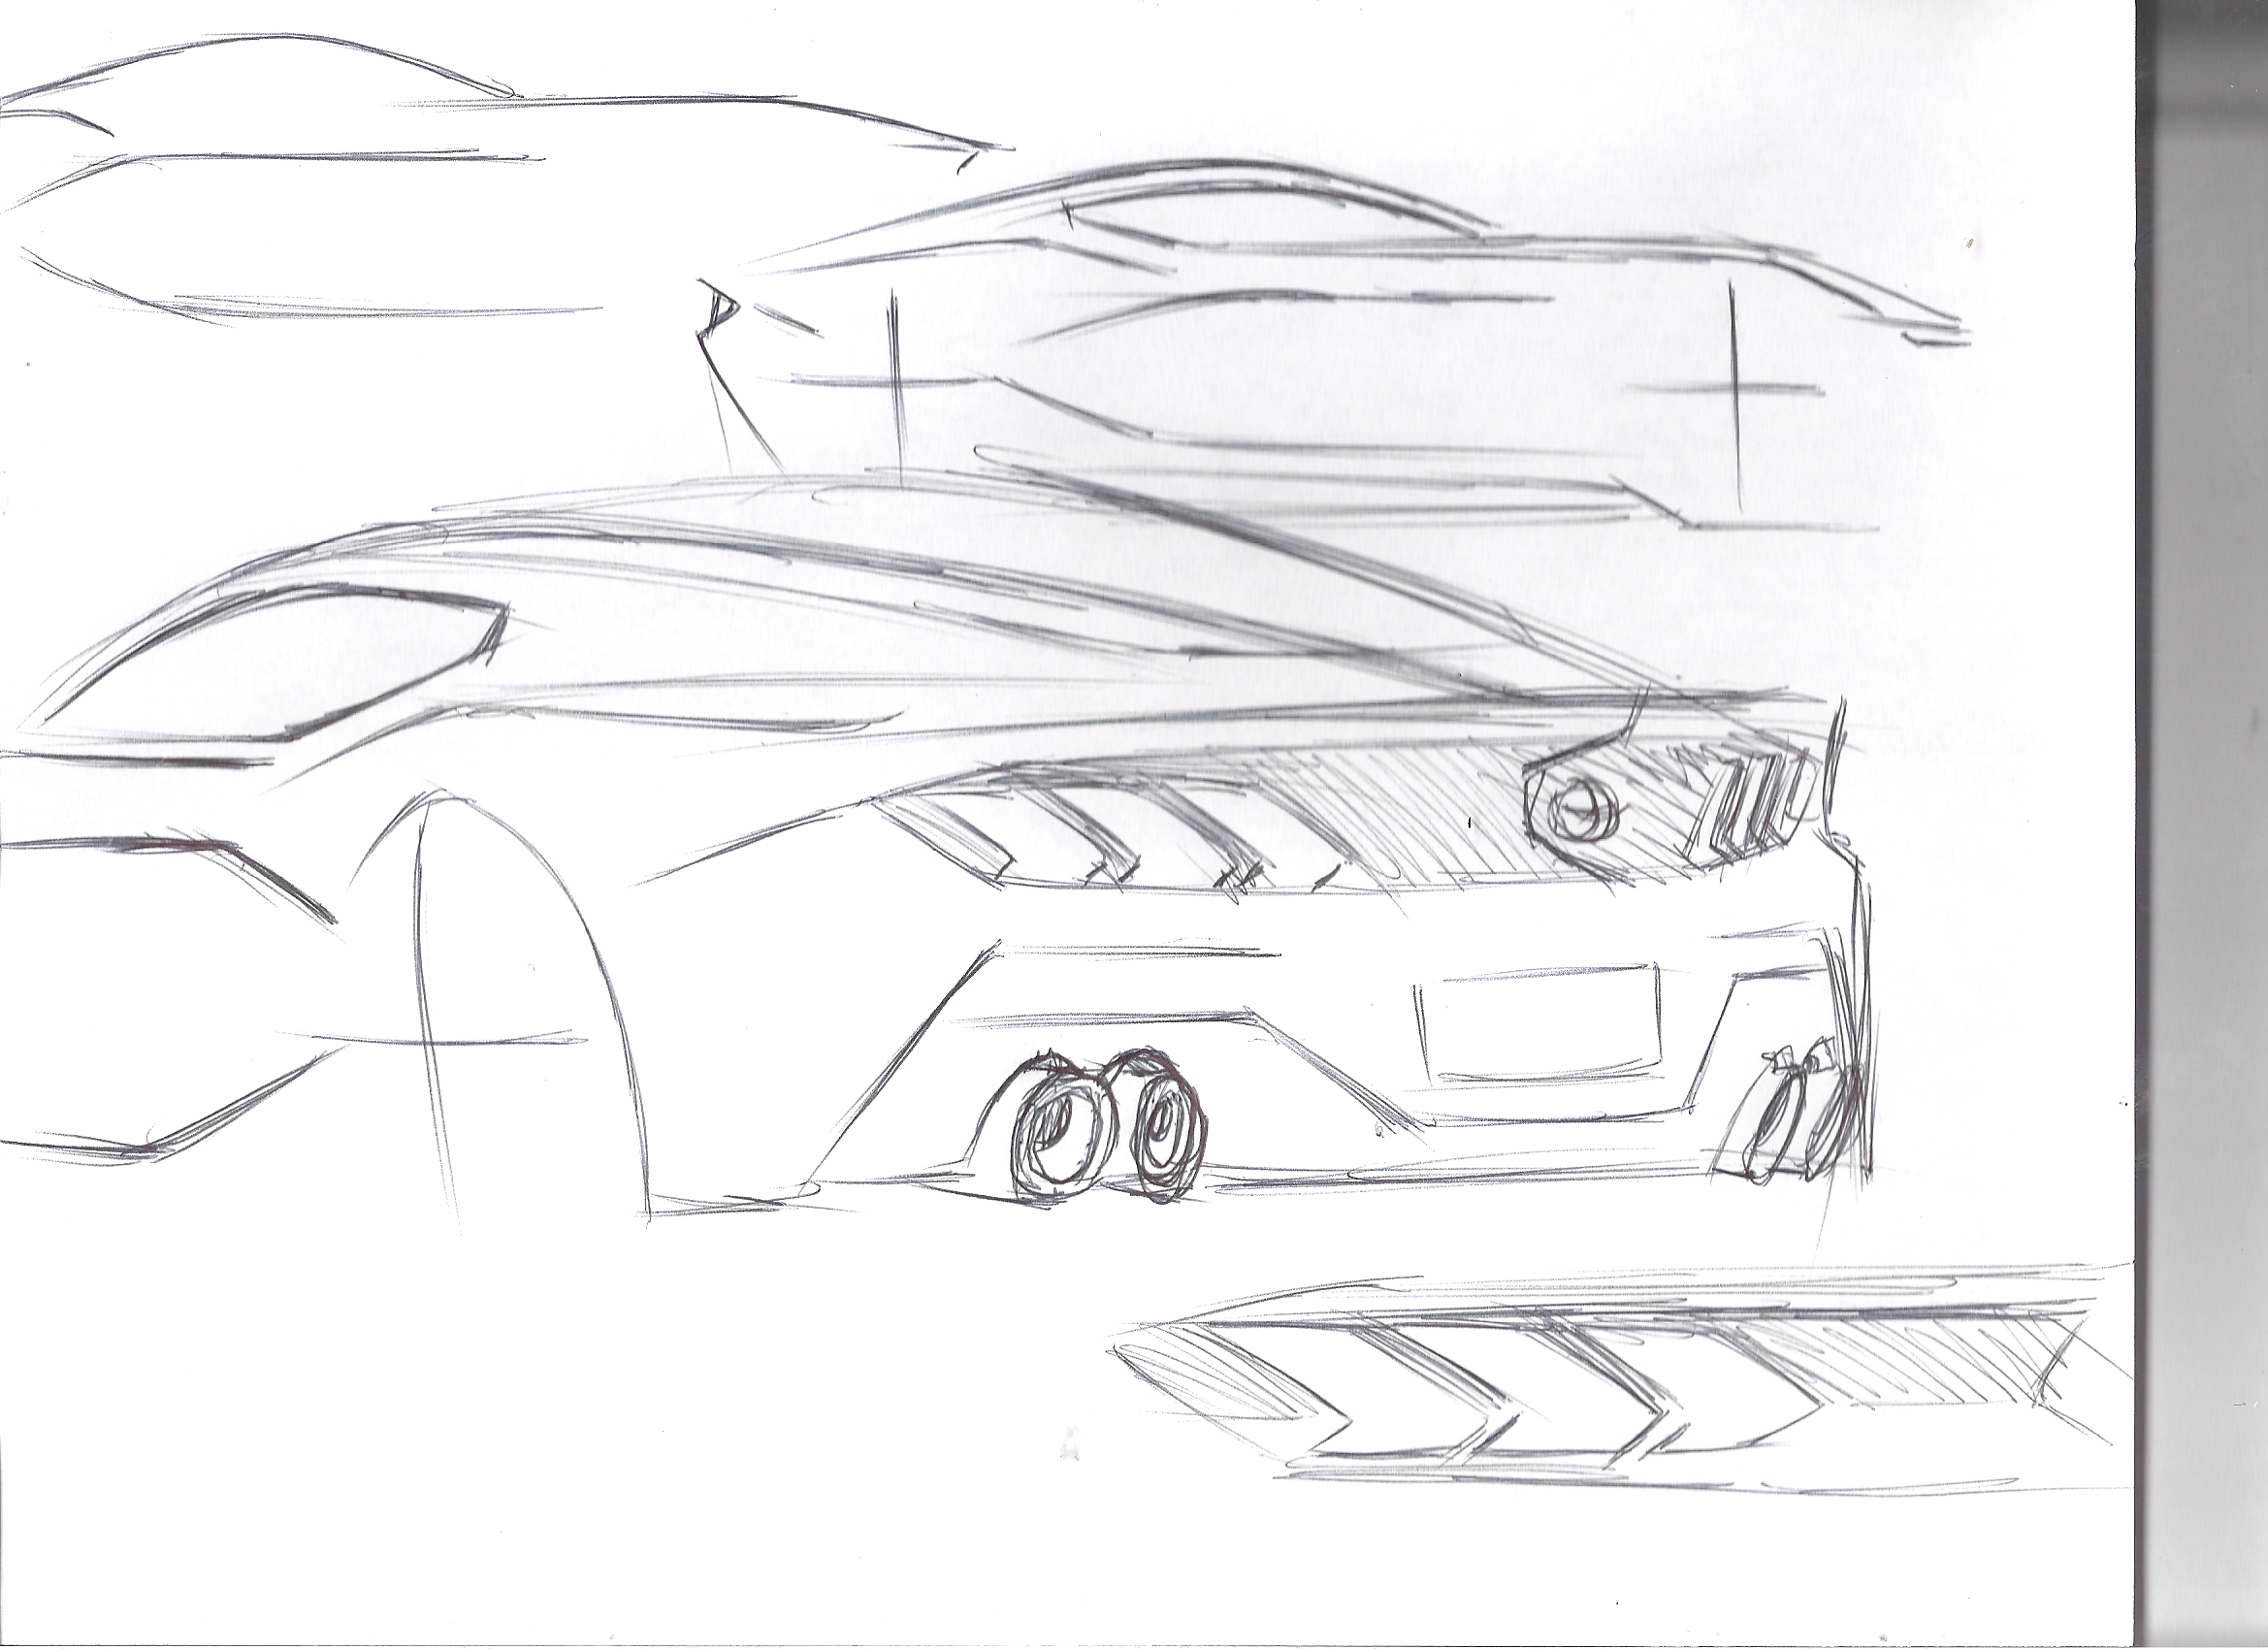 Mustang design sketches.png